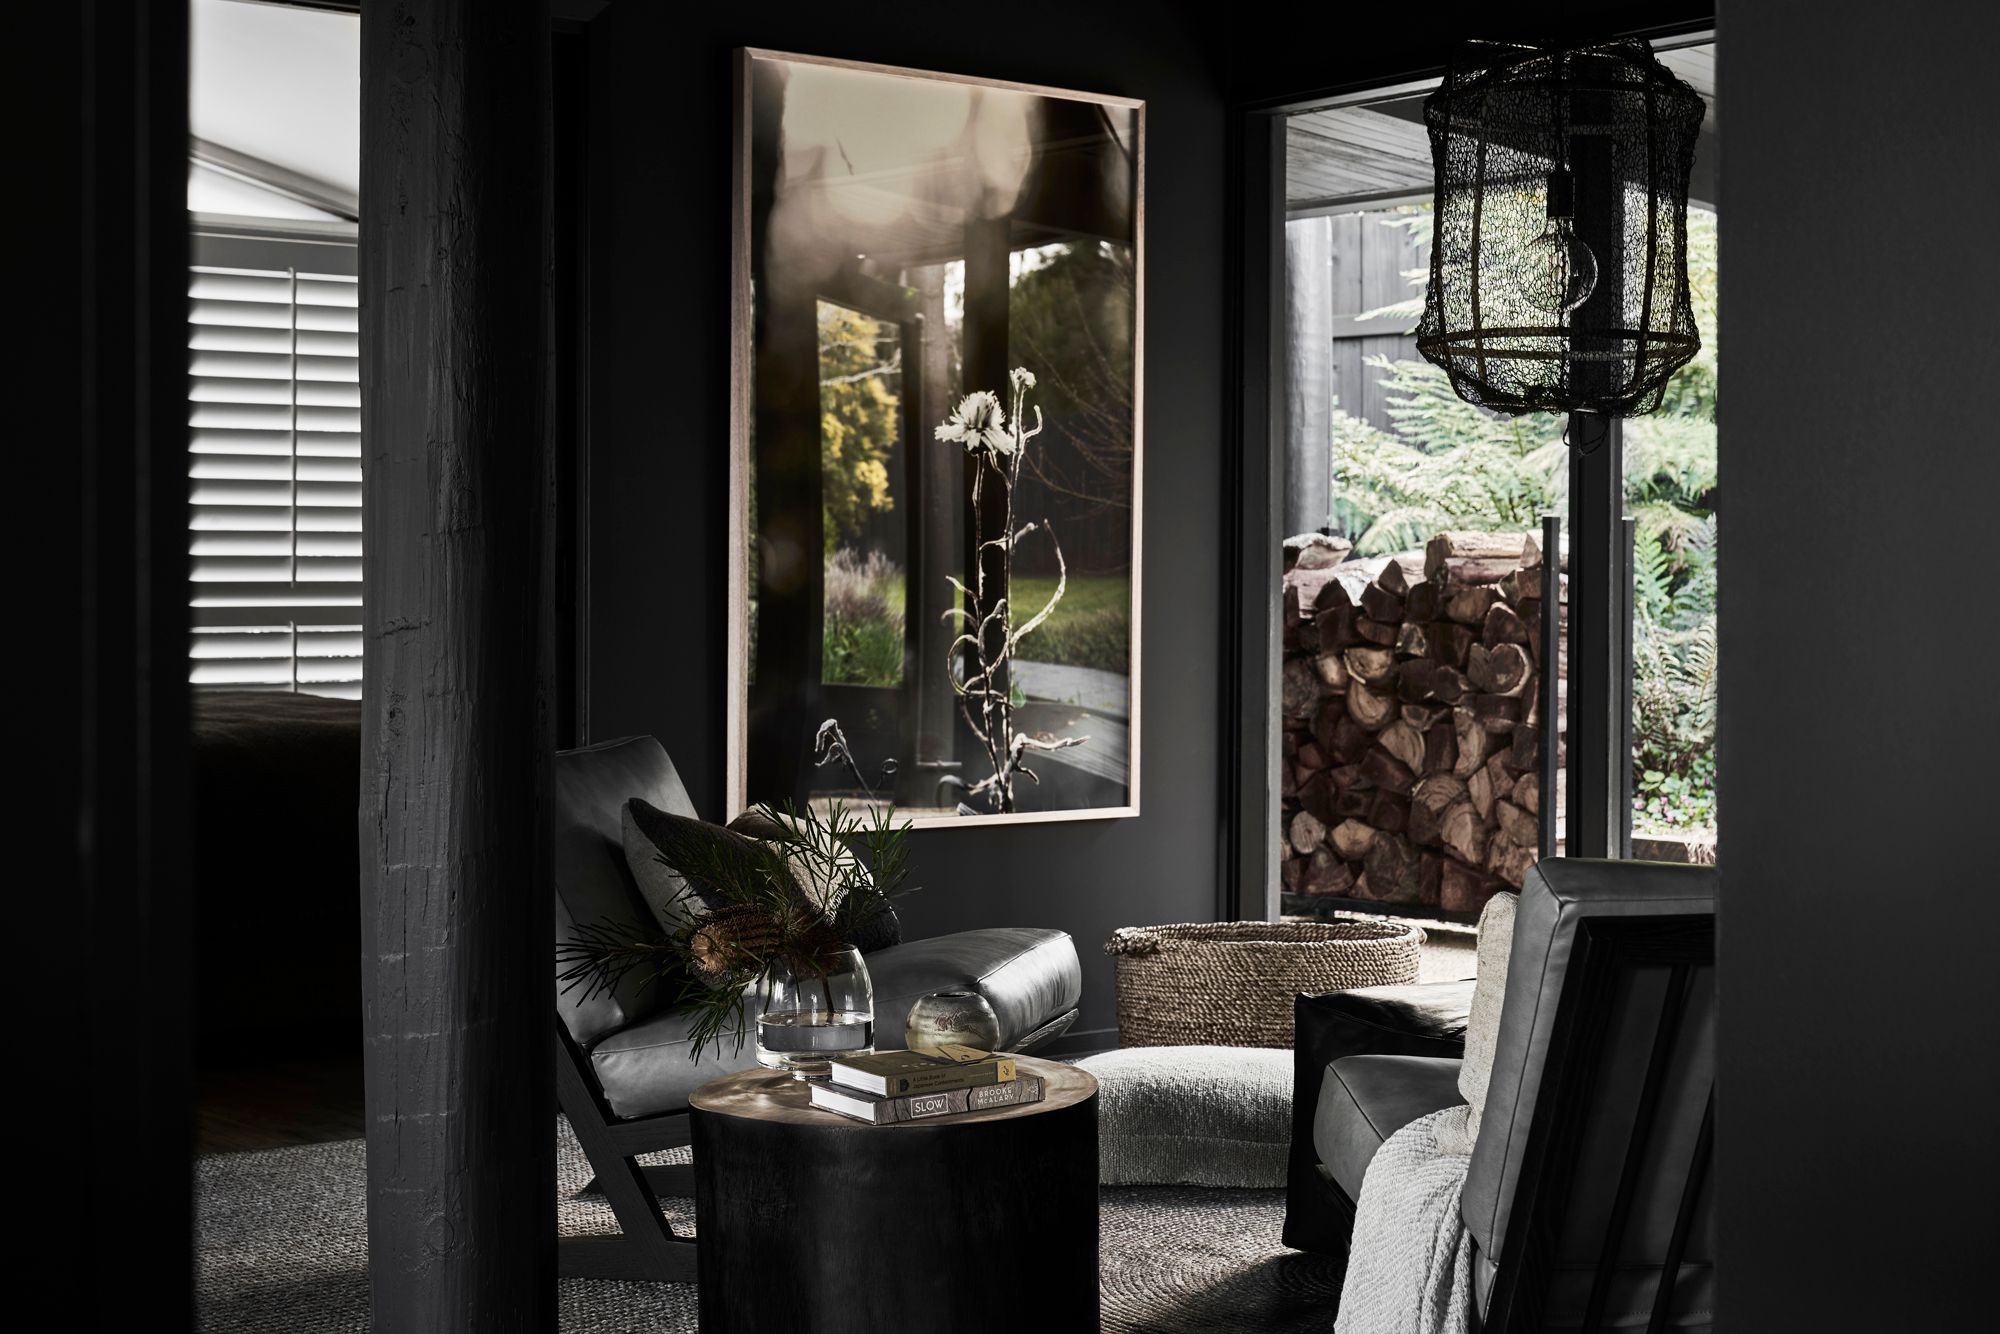 Jumoku Daylesford. Showing the moody interior sitting area